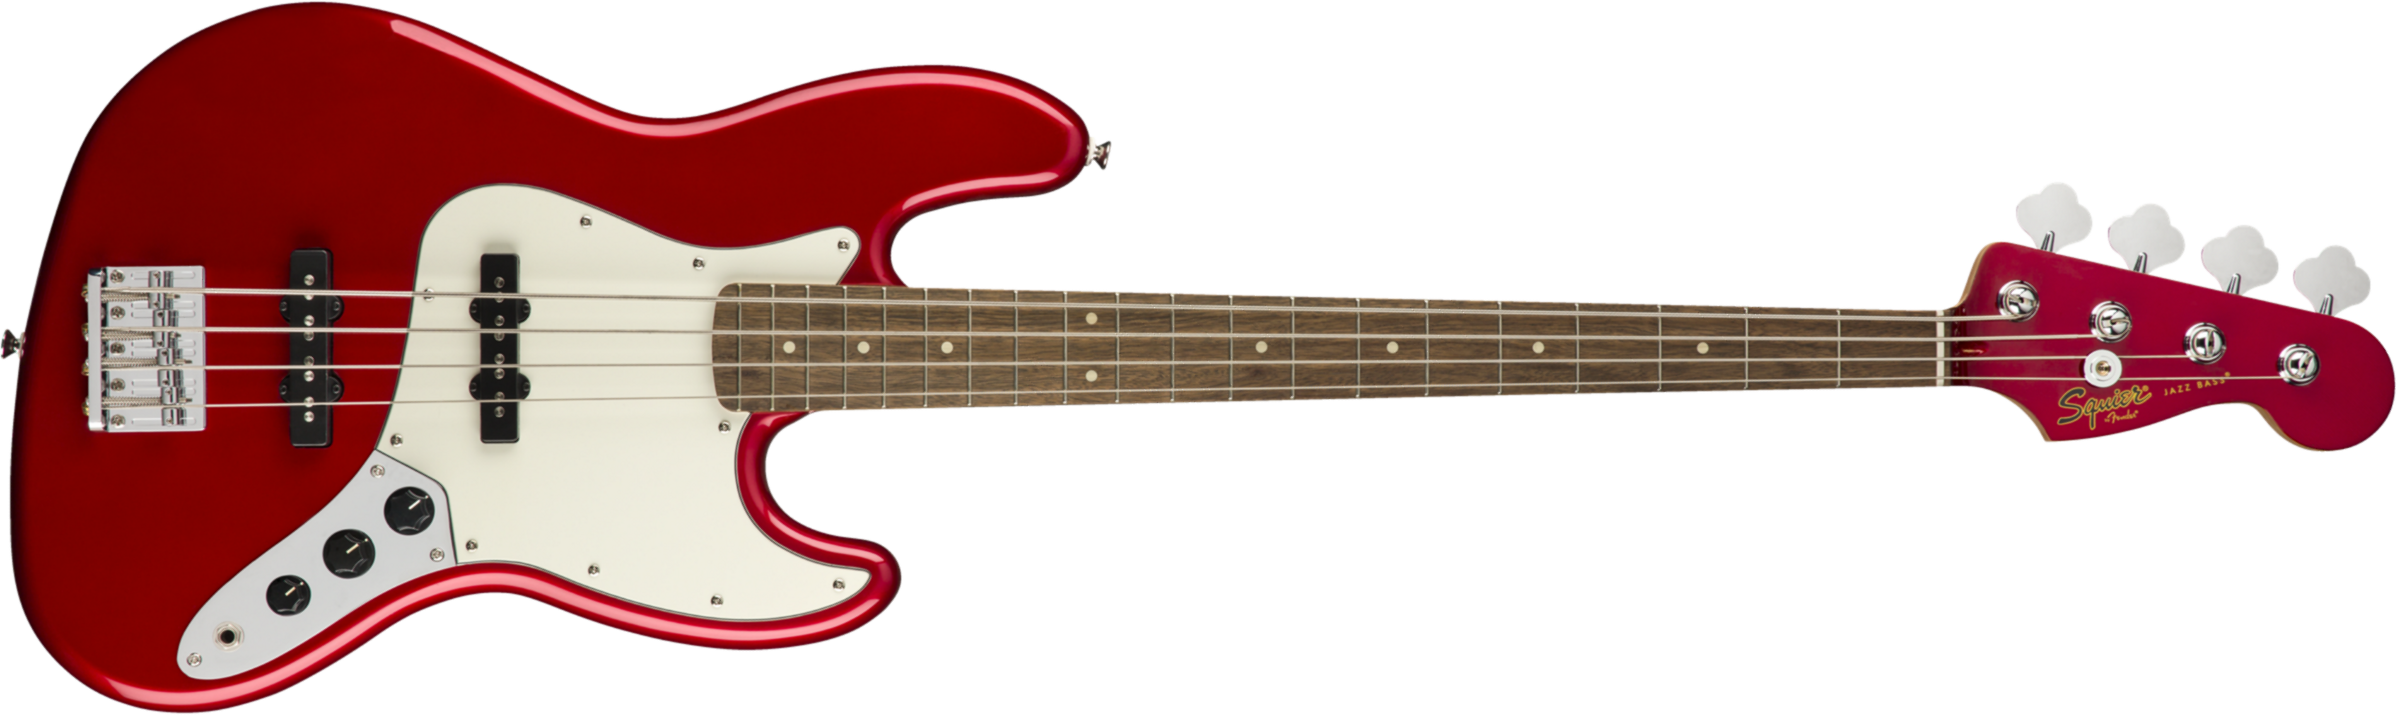 Squier Contemporary Jazz Bass Lau - Metallic Red - Solidbody E-bass - Main picture